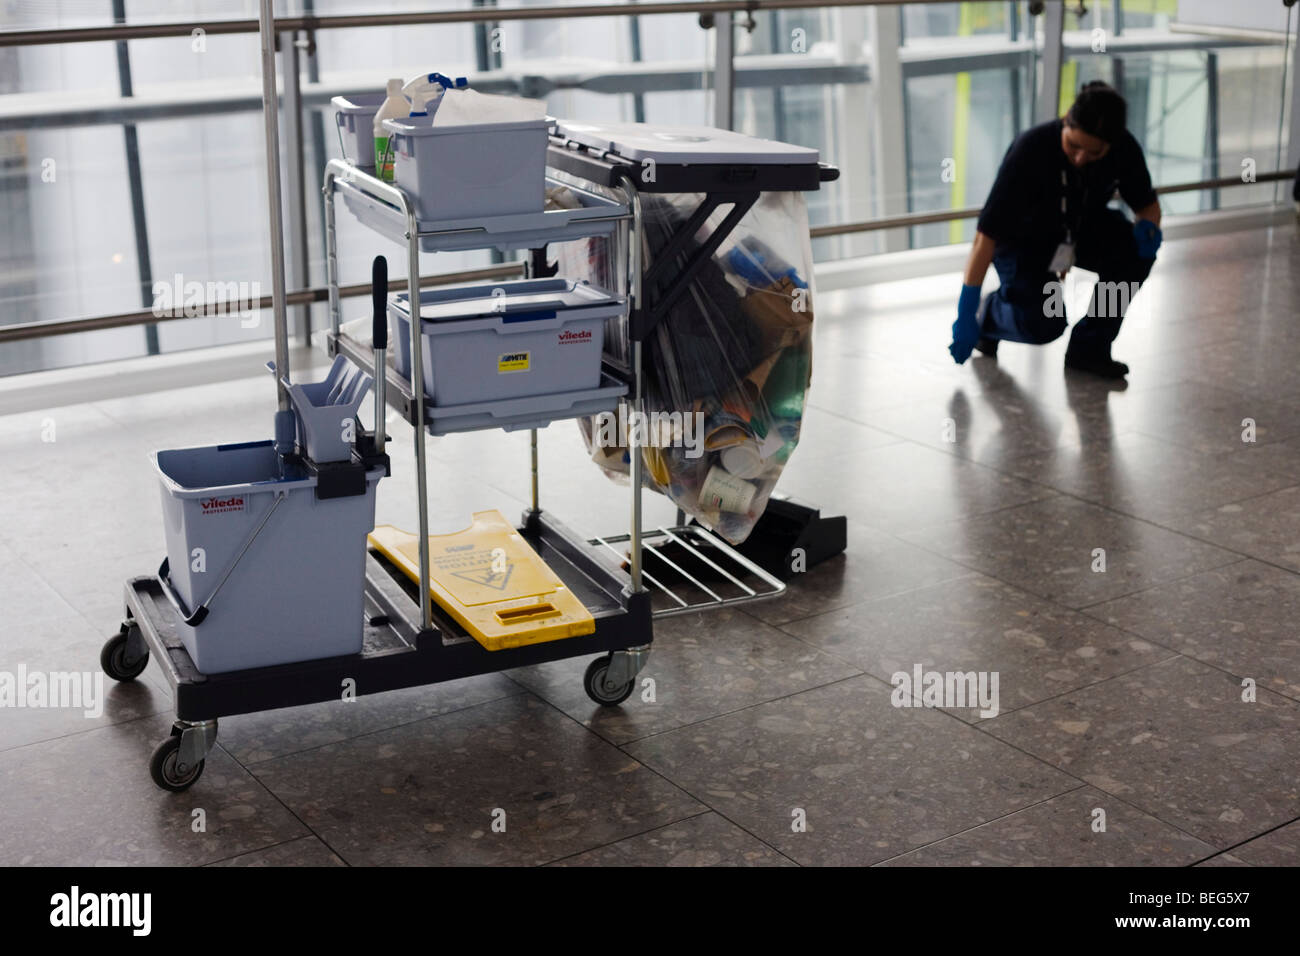 With trolley nearby, a cleaner stoops to remove sticky debris on the concourse floor at Heathrow Airport's Terminal 5. Stock Photo